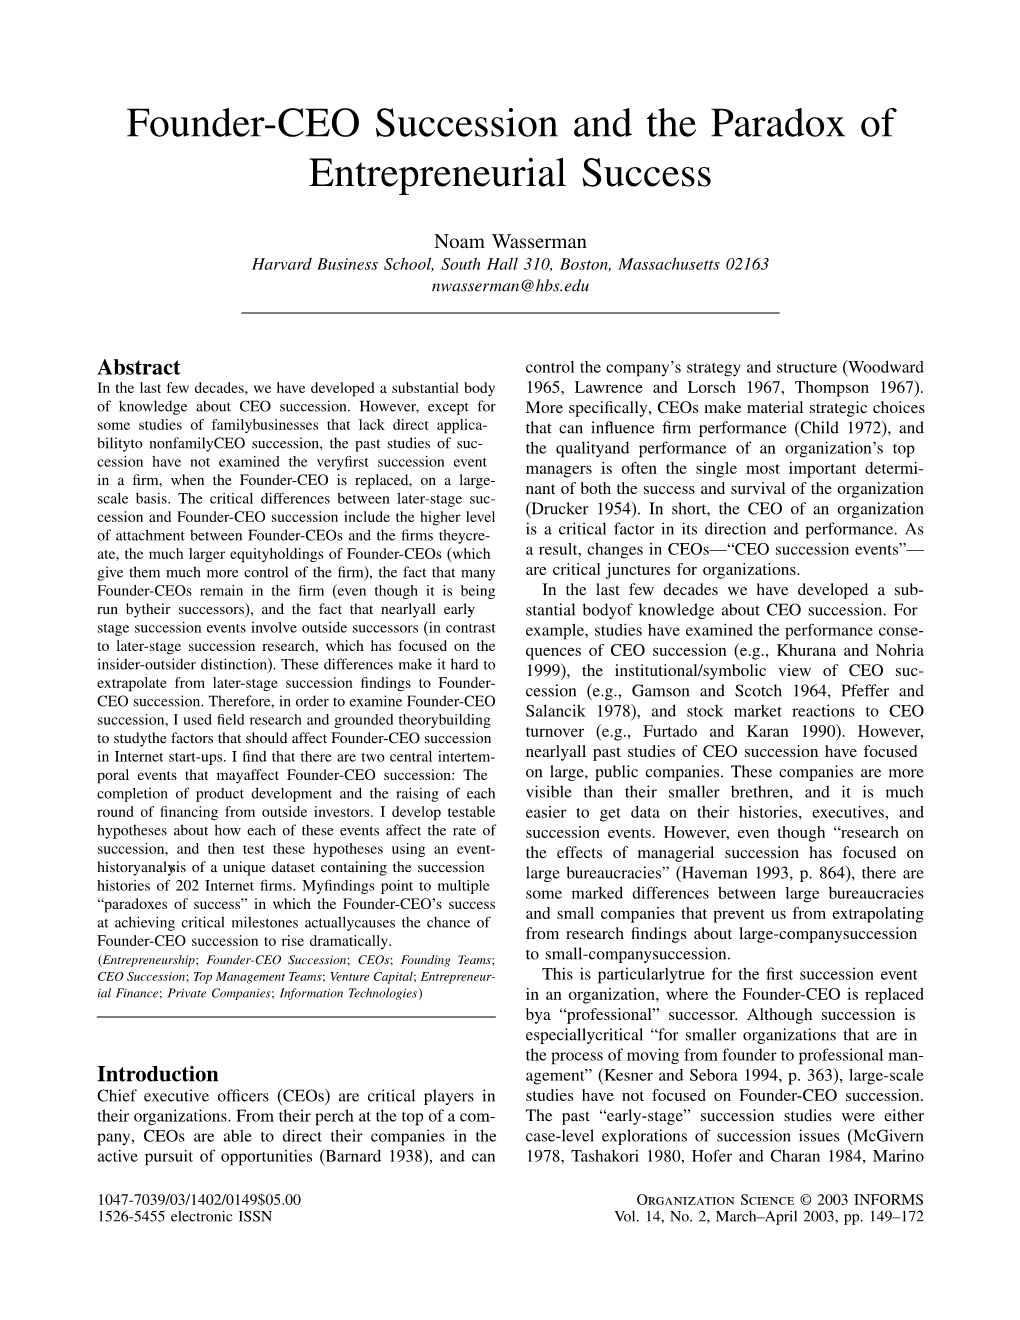 Founder-CEO Succession and the Paradox of Entrepreneurial Success